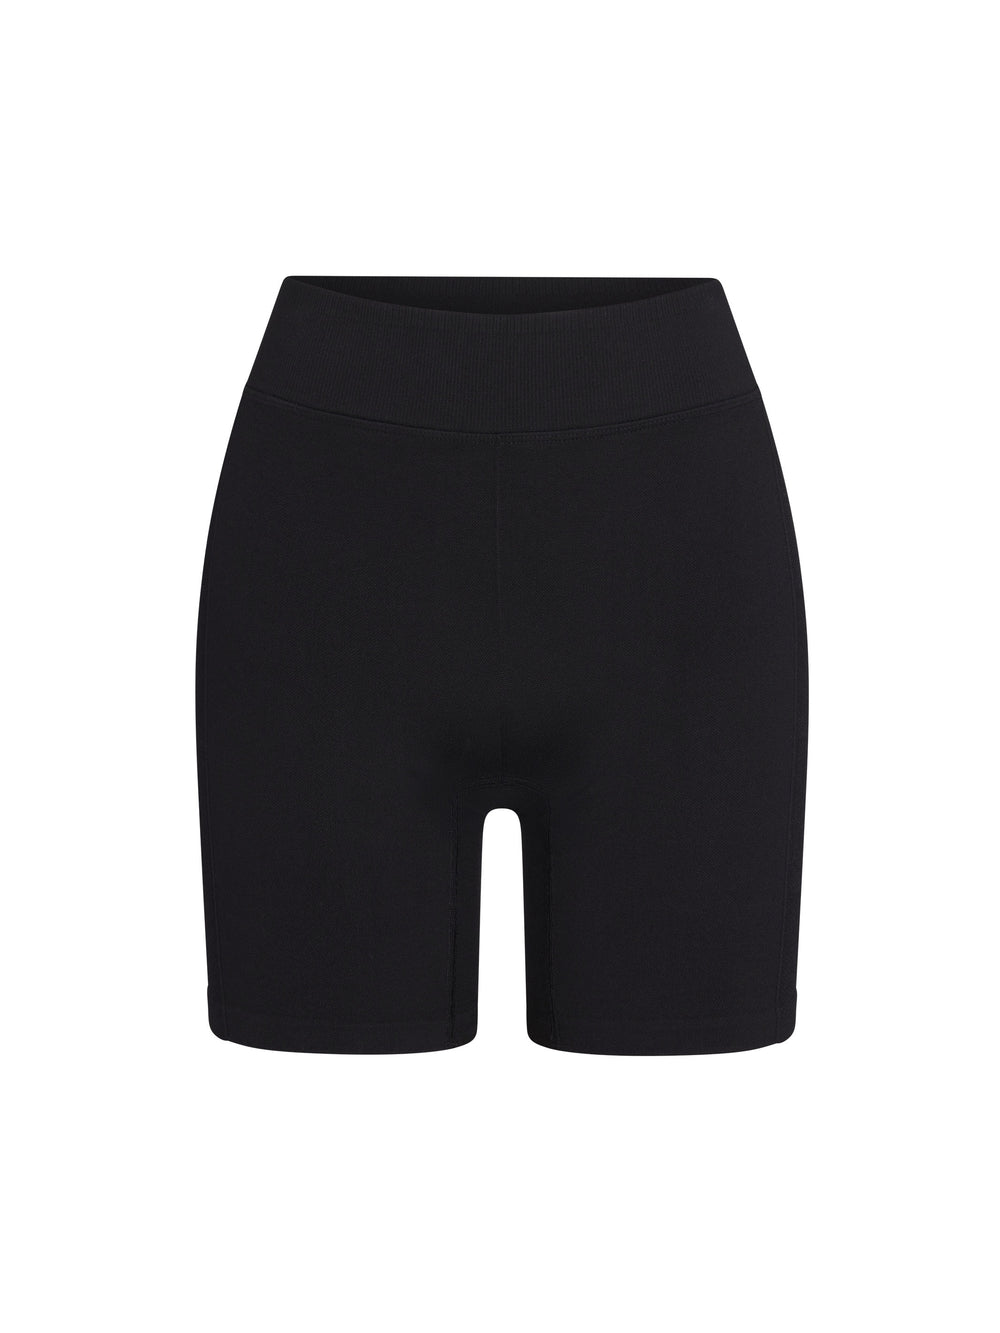 Women's Compression Short front view in black.